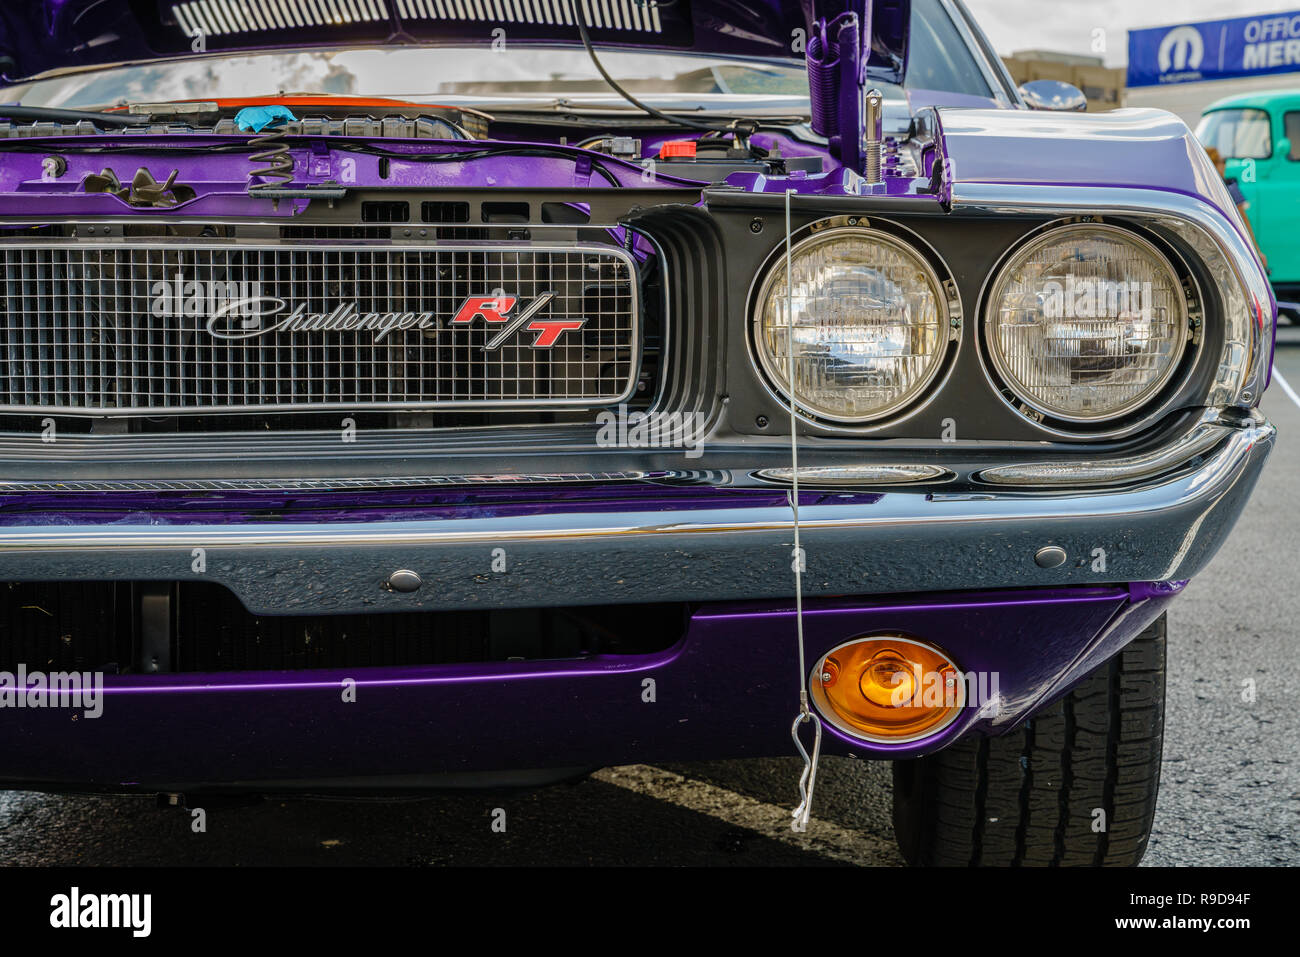 Detroit, Michigan, August 19, 2016: Grille details of a 1970 Dodge Challenger at Woodward Dream Cruise - largest one-day automotive event in USA Stock Photo